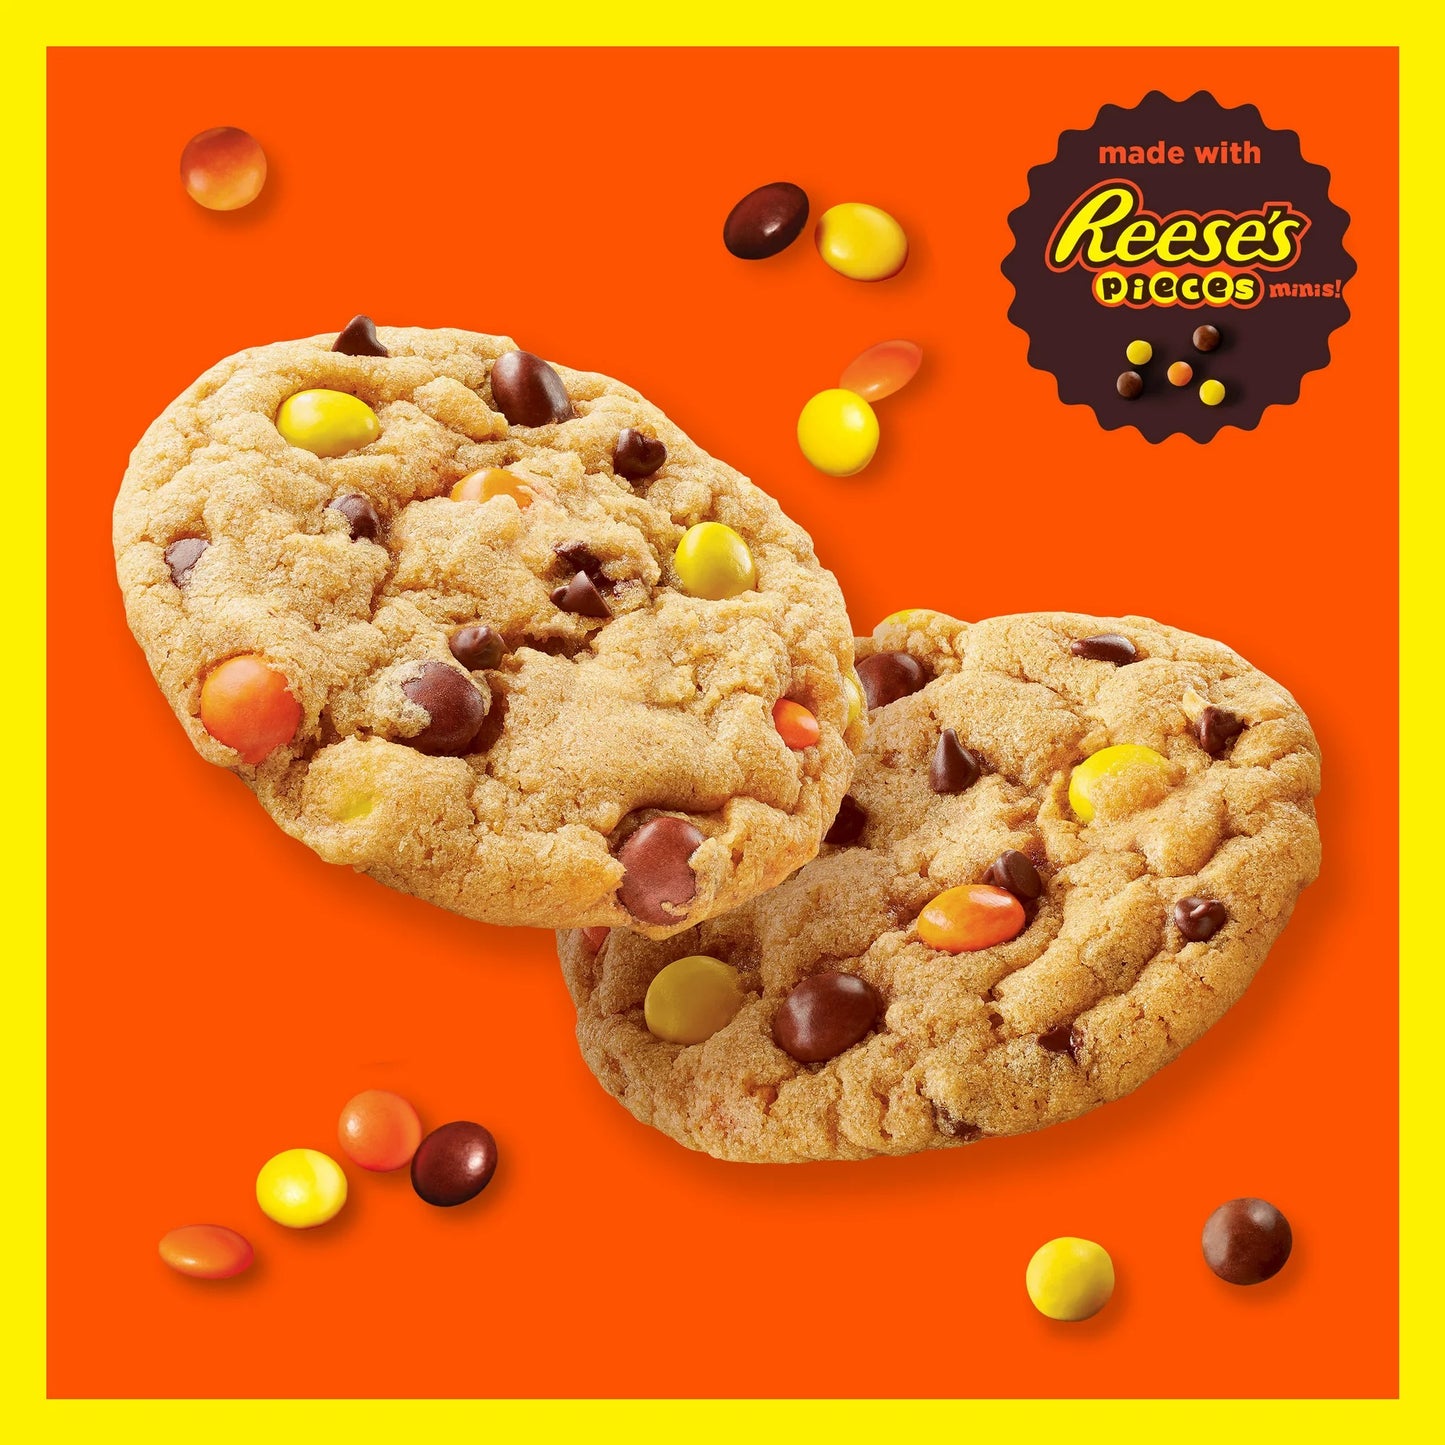 REESE'S PIECES Cookie Mix